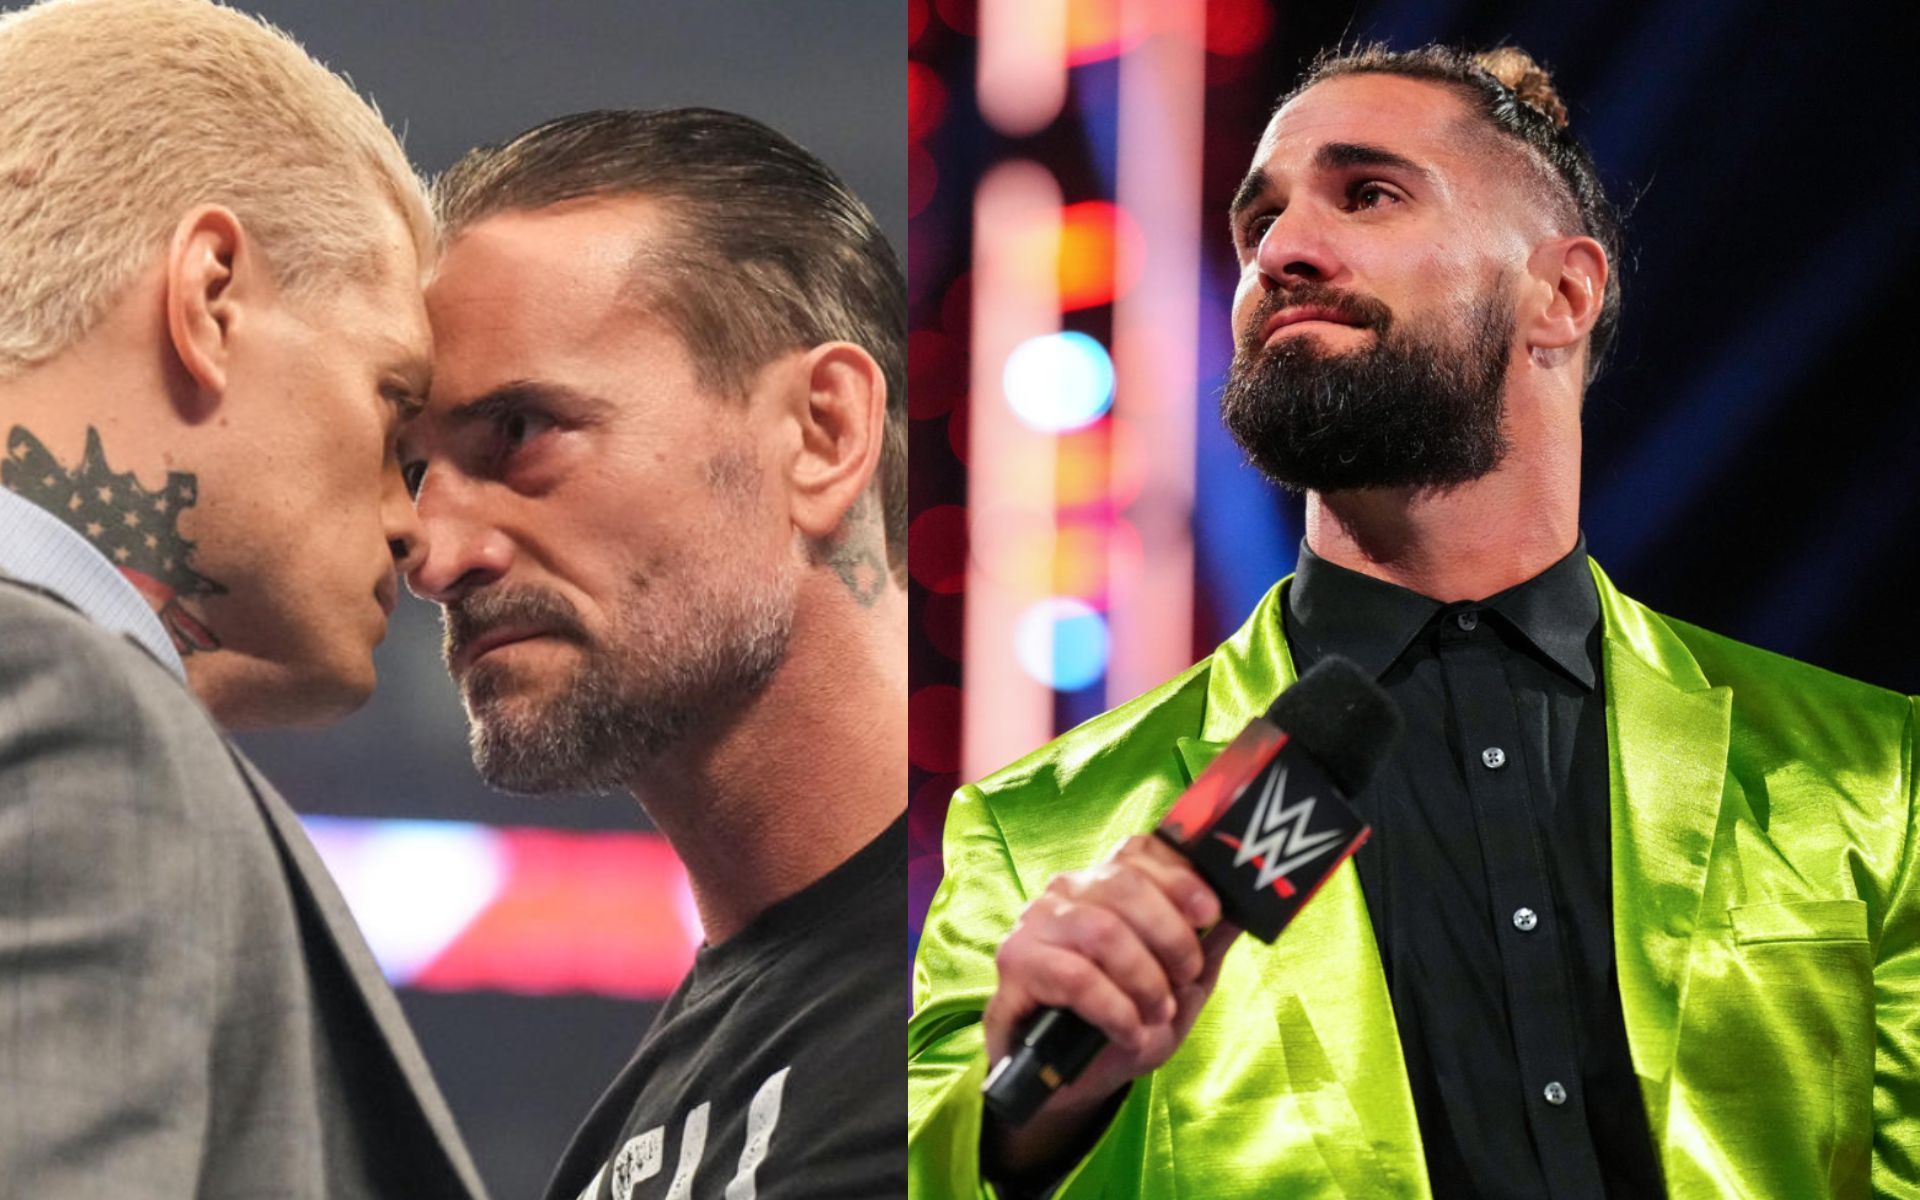 RAW featured a lot of mixed emotions by WWE stars (Image source: WWE.com)